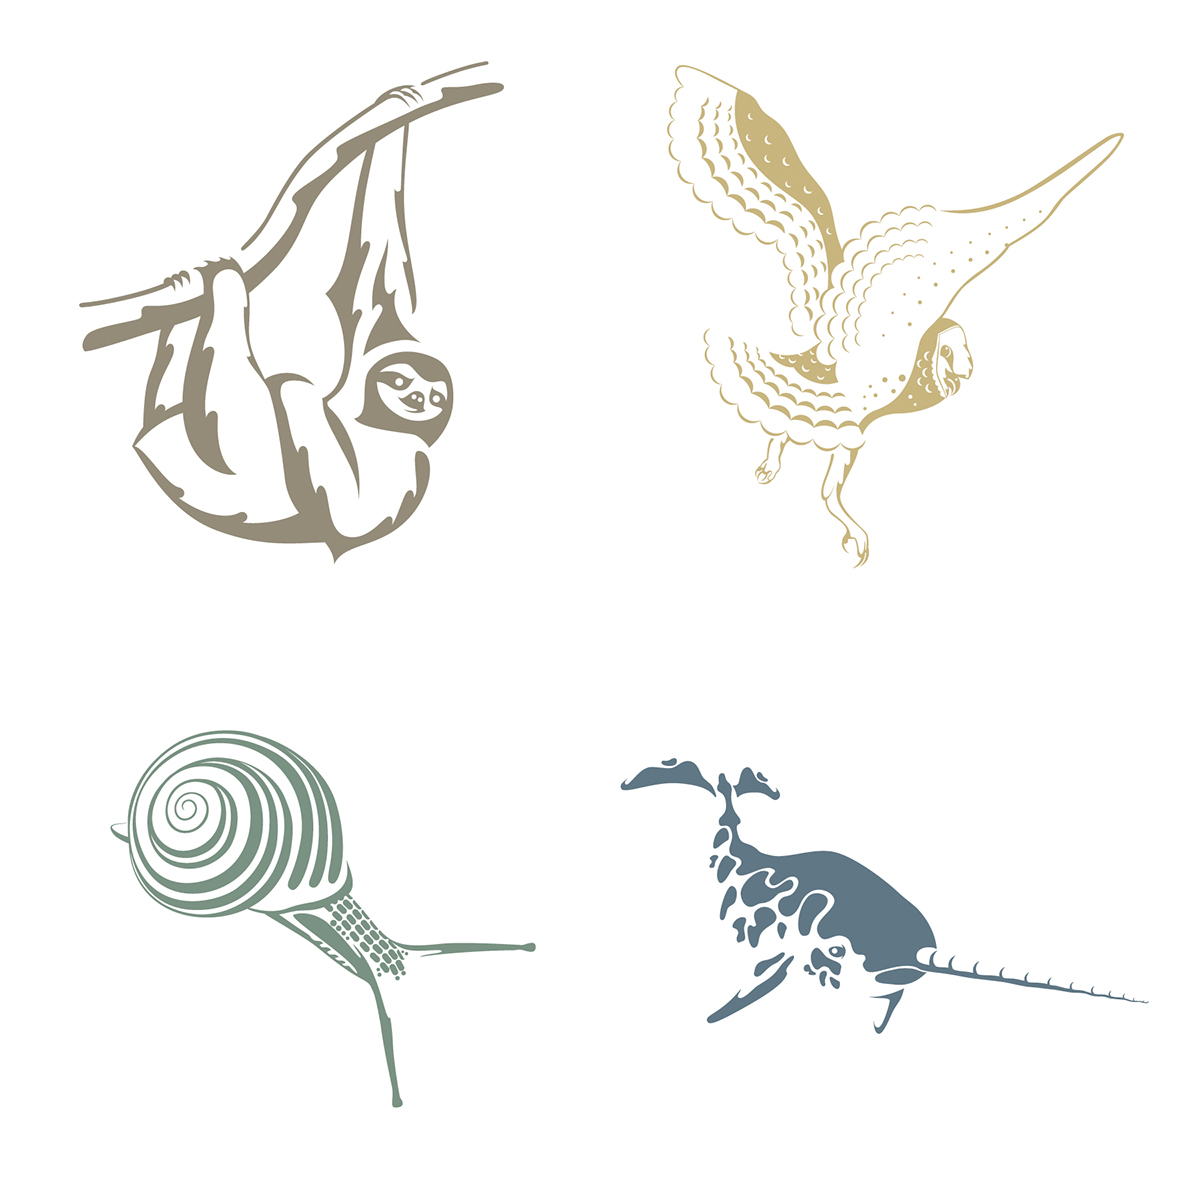 Icon icons symbol symbols sloth owl barn owl snail narwhal animal animals icongraphy creature creatures